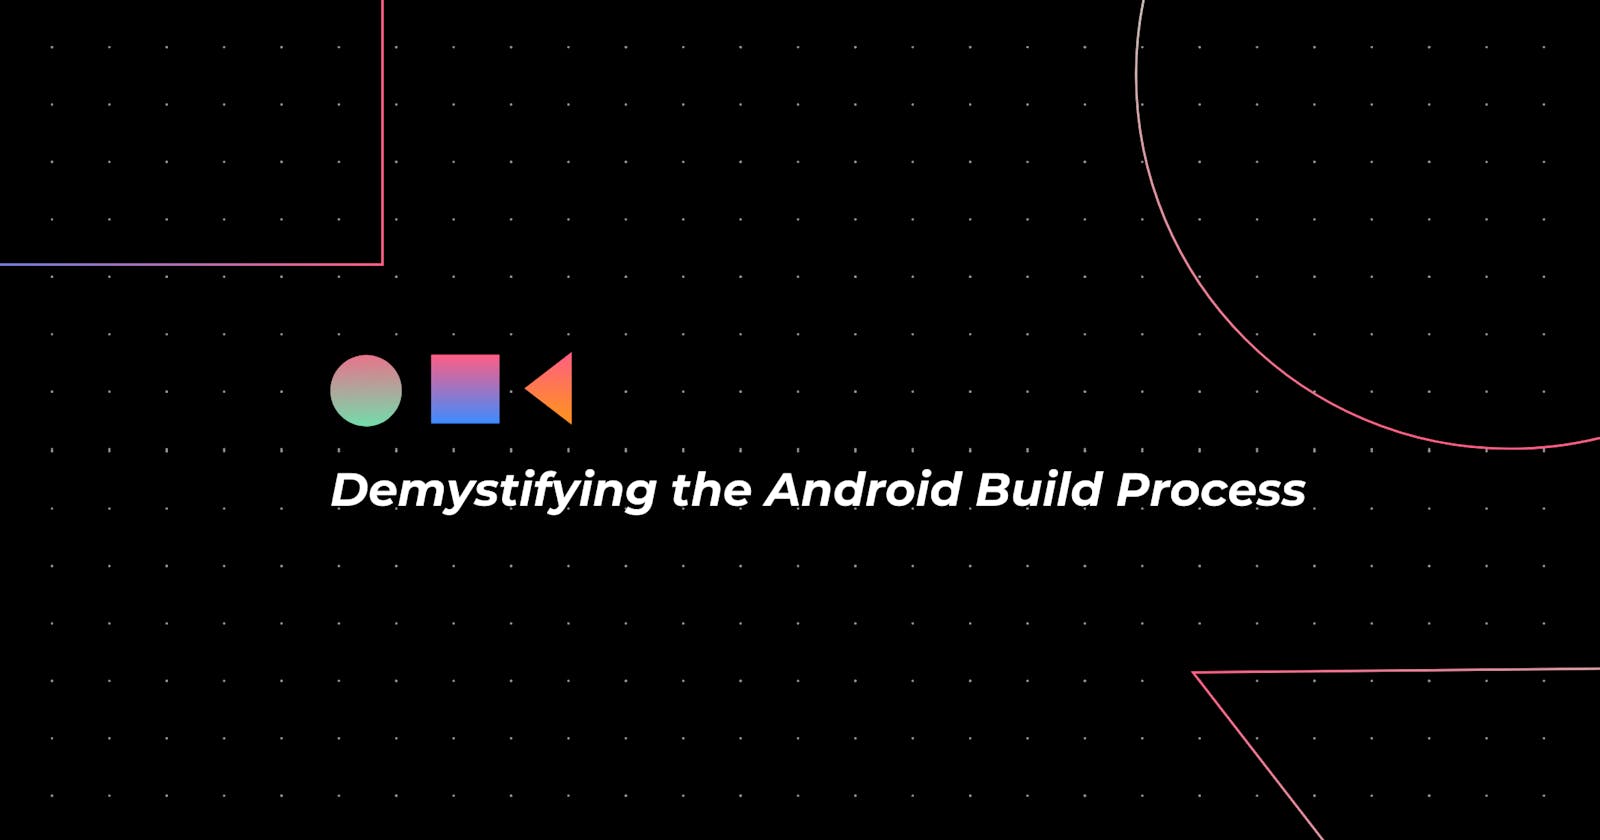 Demystifying the Android Build Process